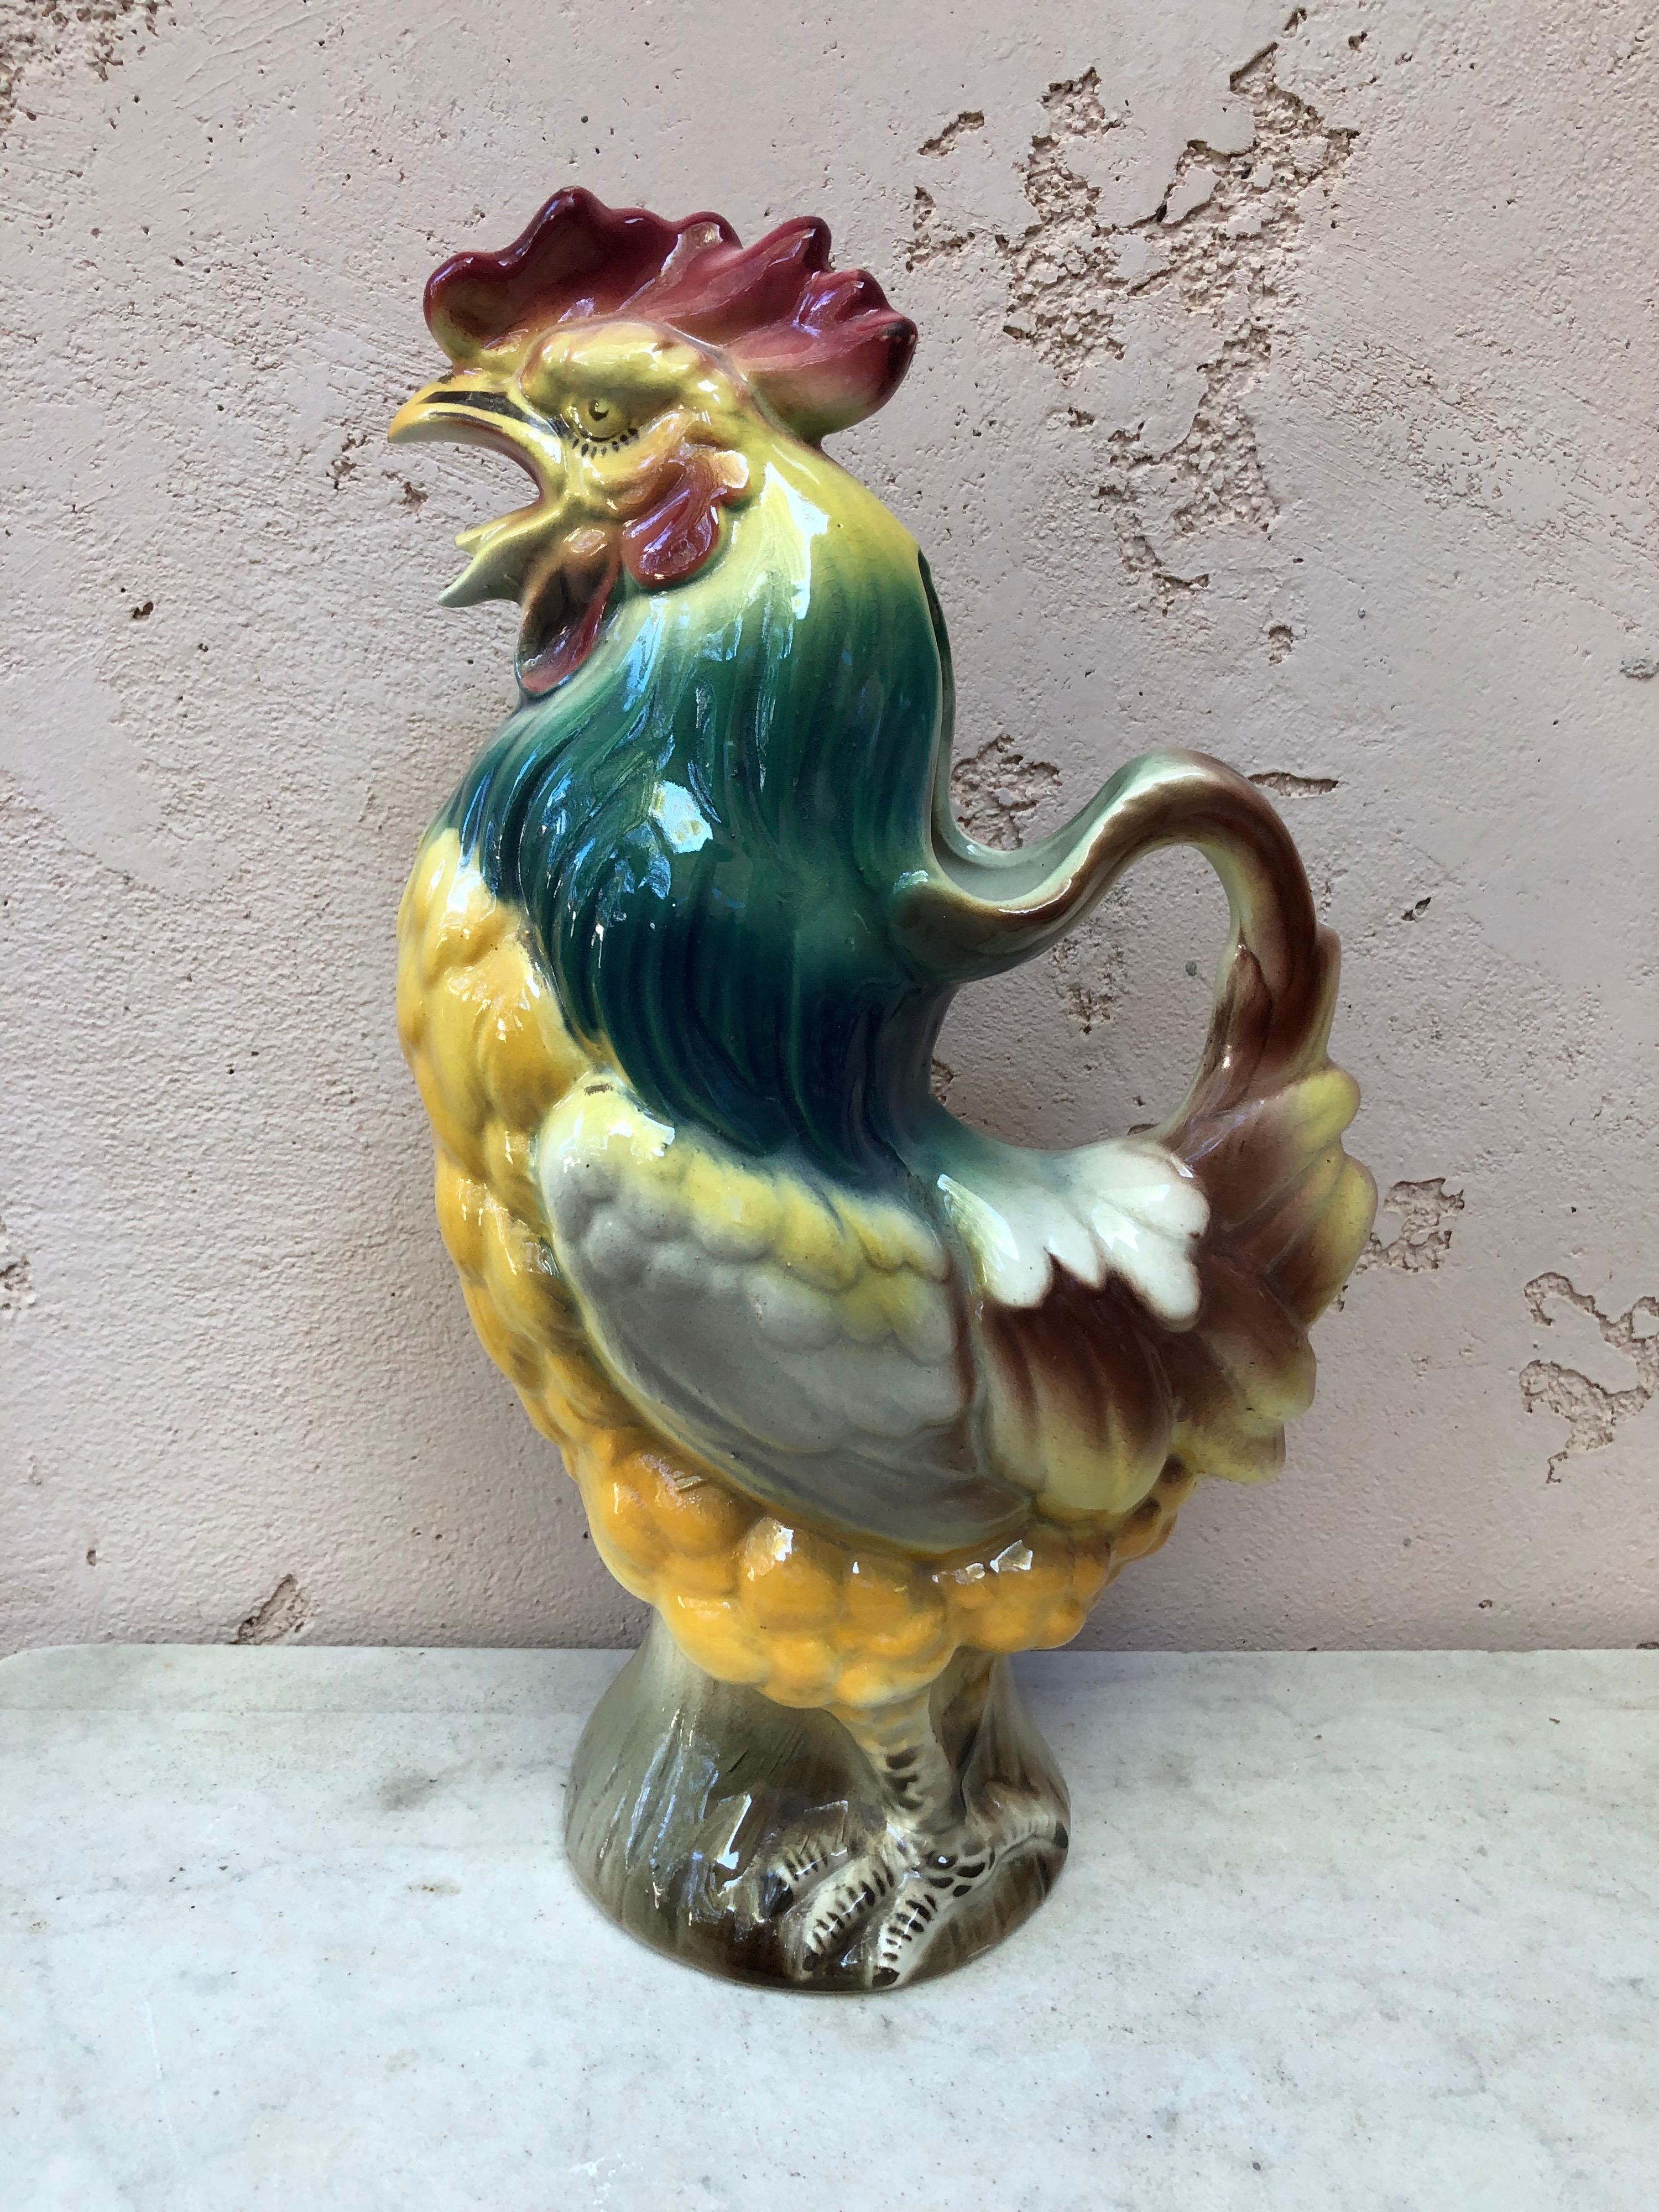 French Majolica rooster pitcher signed Keller and Guerin Saint Clement, circa 1900.
Original older model.
Measure: Height / 12.8 inches.